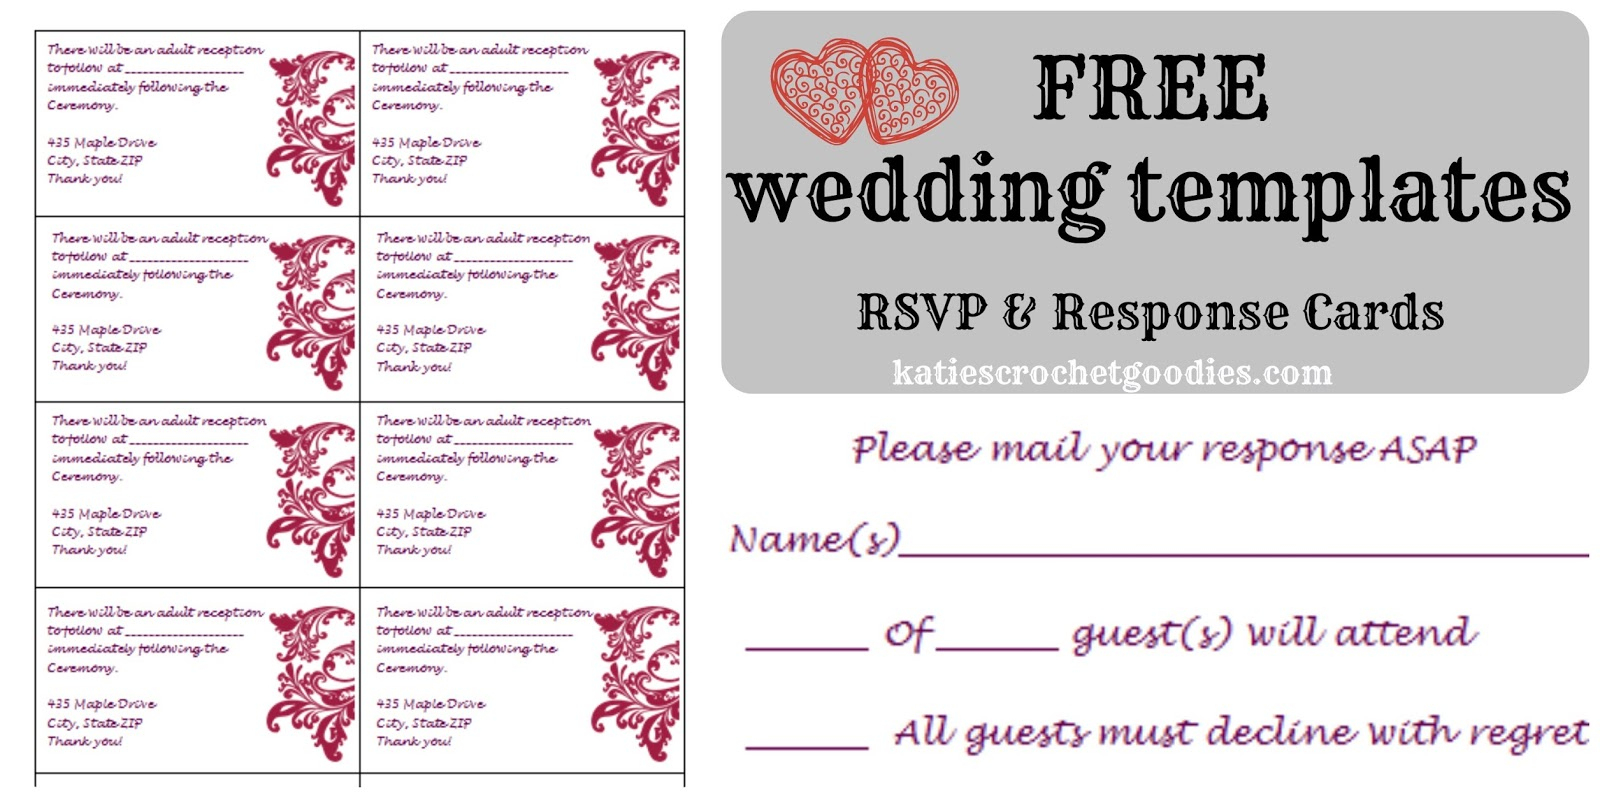 Free Wedding Templates Awesome Free Rsvp Template - Zlatadoor - Free Printable Rsvp Cards